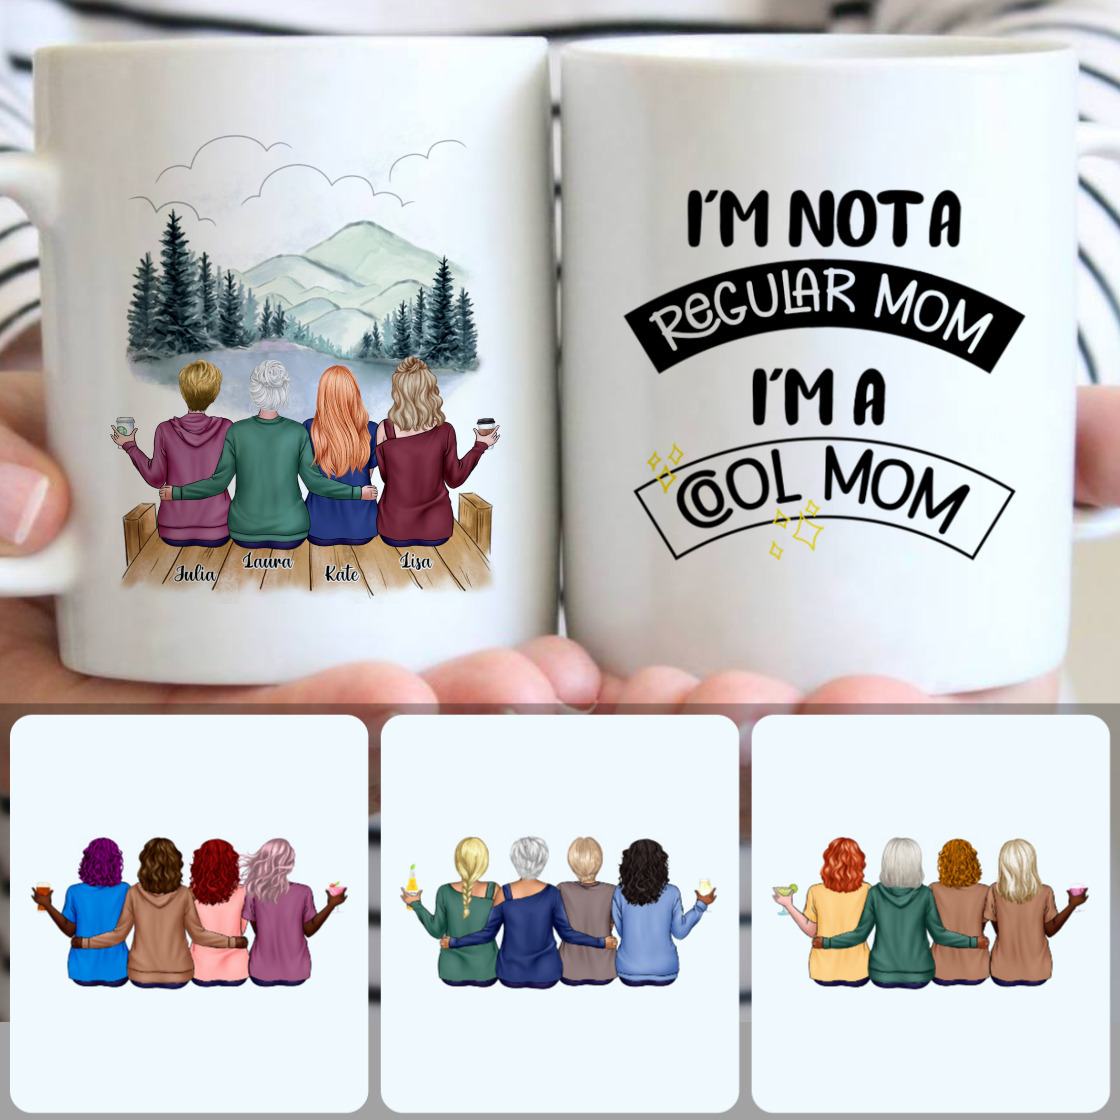 Personalized Mug, Perfect Gifts For Mom, Mother & 3 Daughters Customized Coffee Mug With Names